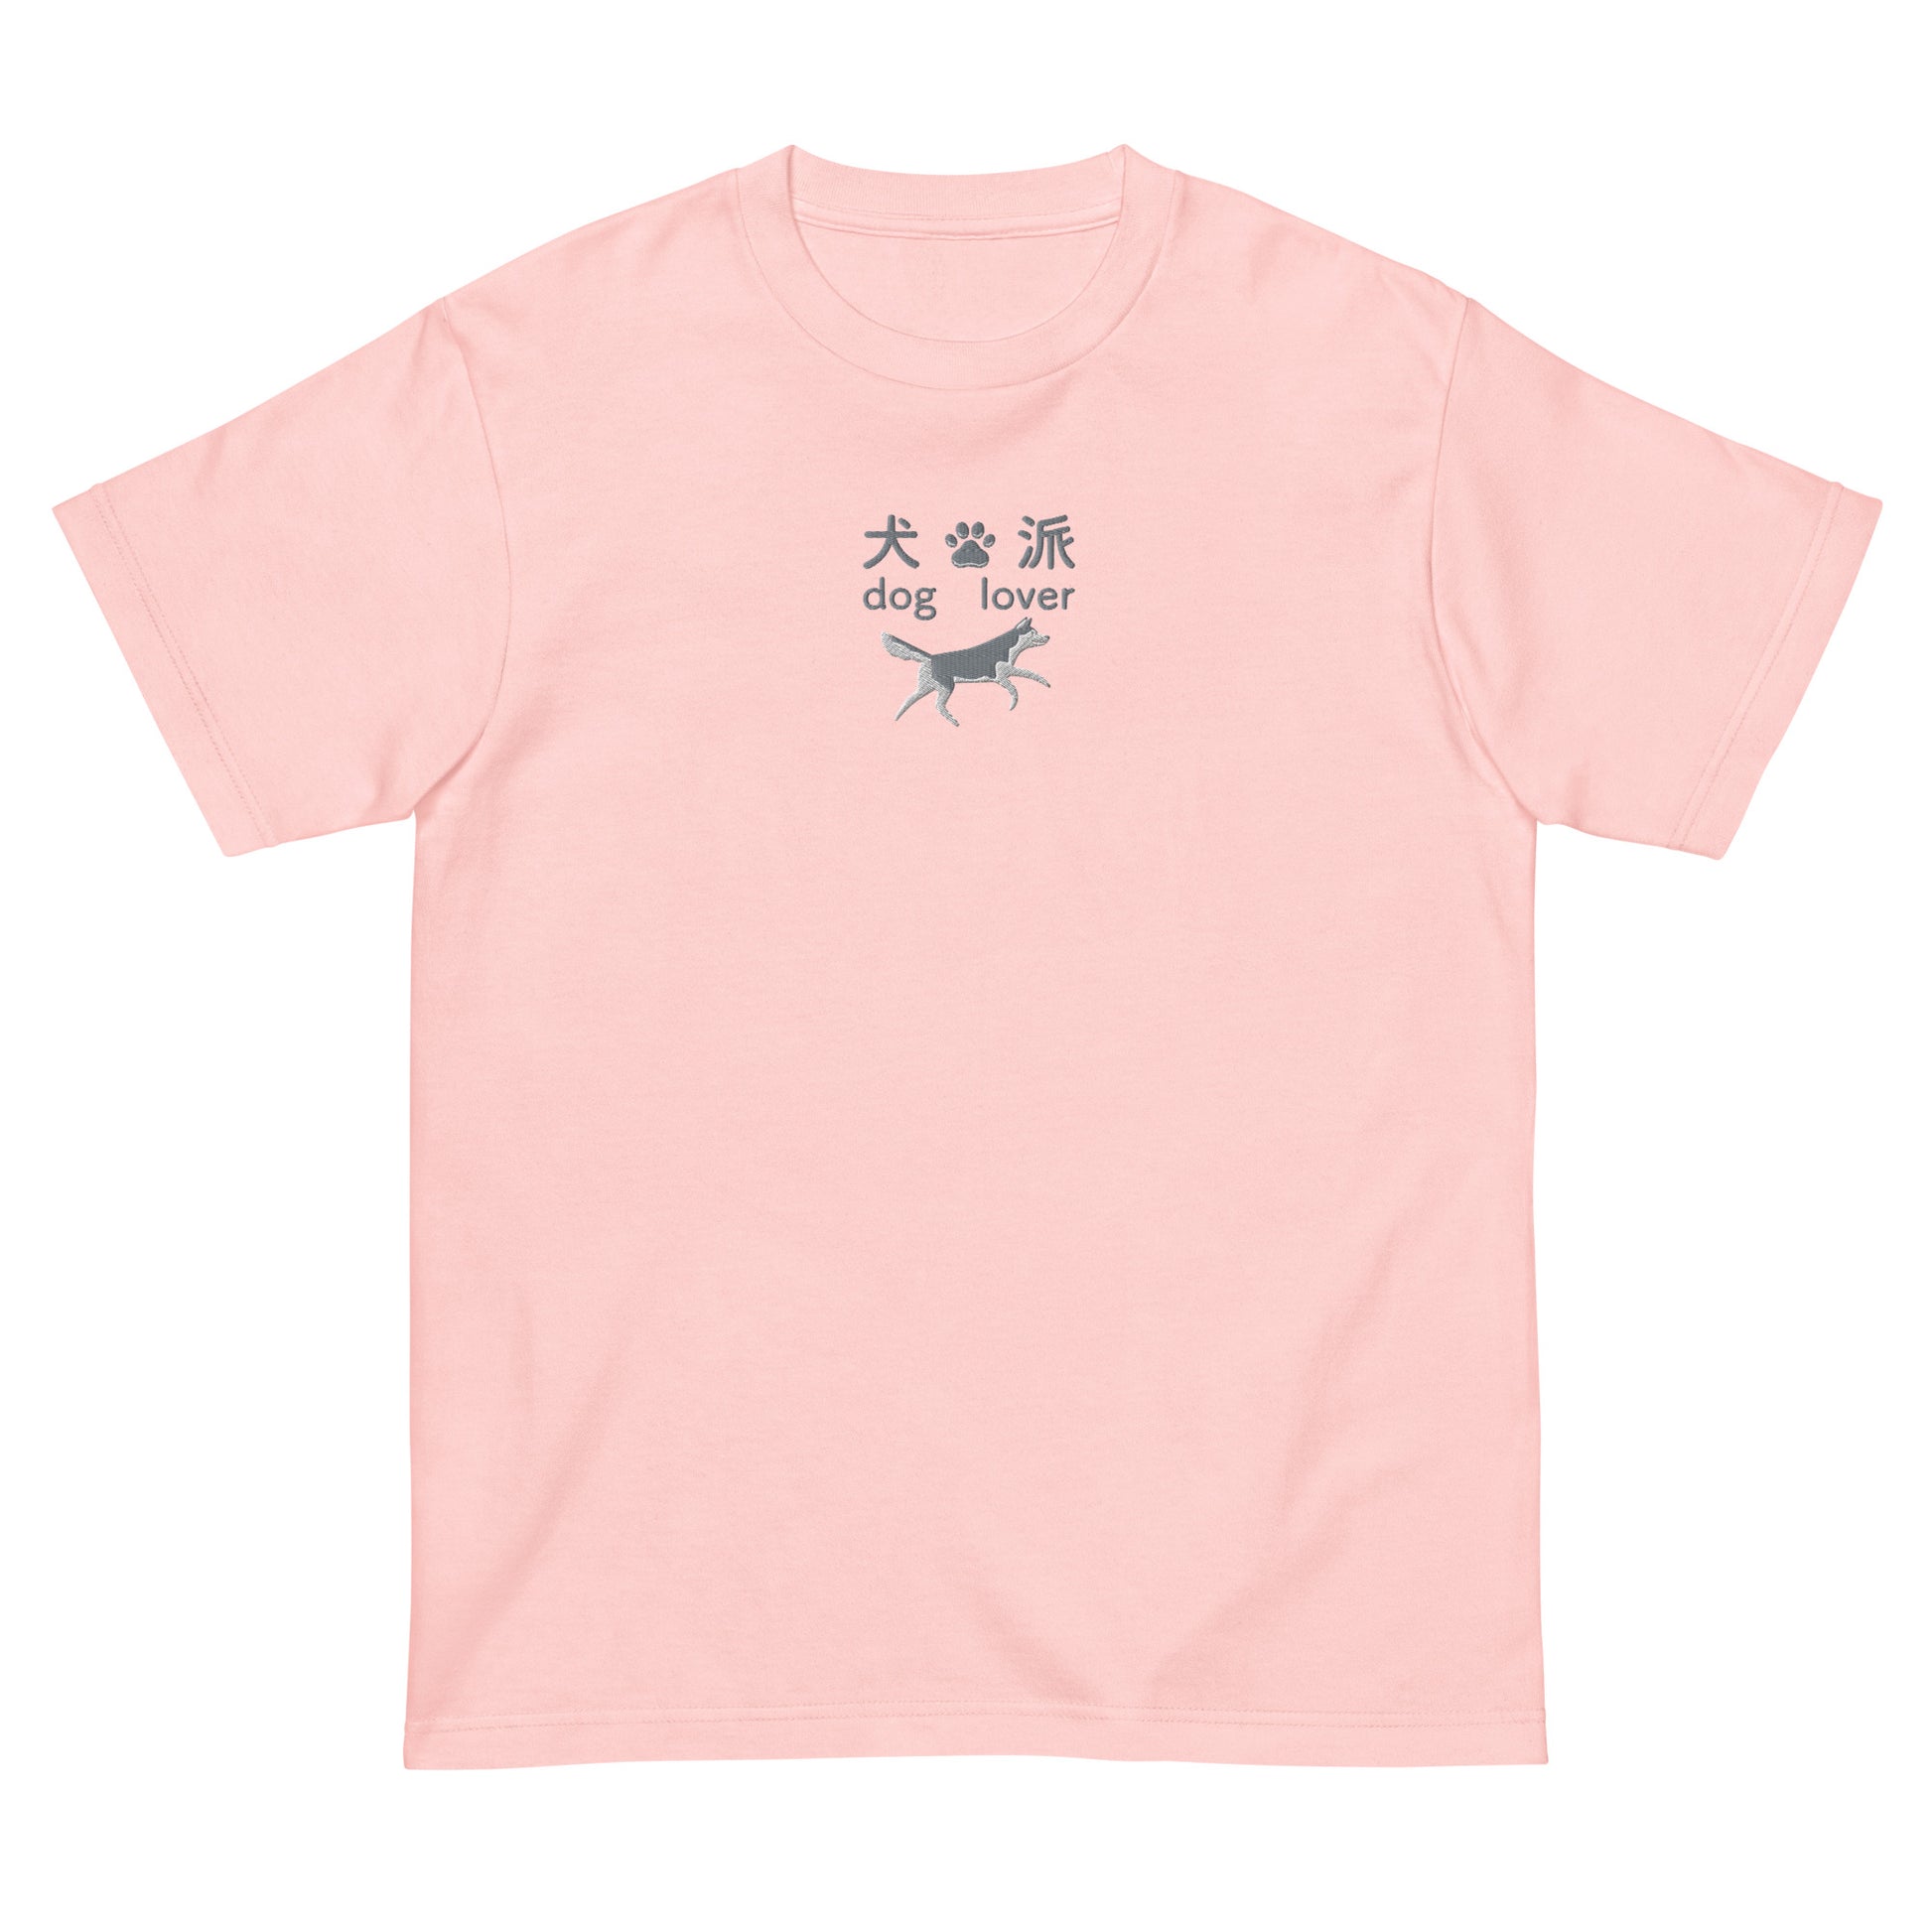 Pink High Quality Tee - Front Design with an Gray, White Embroidery "Dog Lover" in Japanese,Chinese and English, and Dog Embroidery